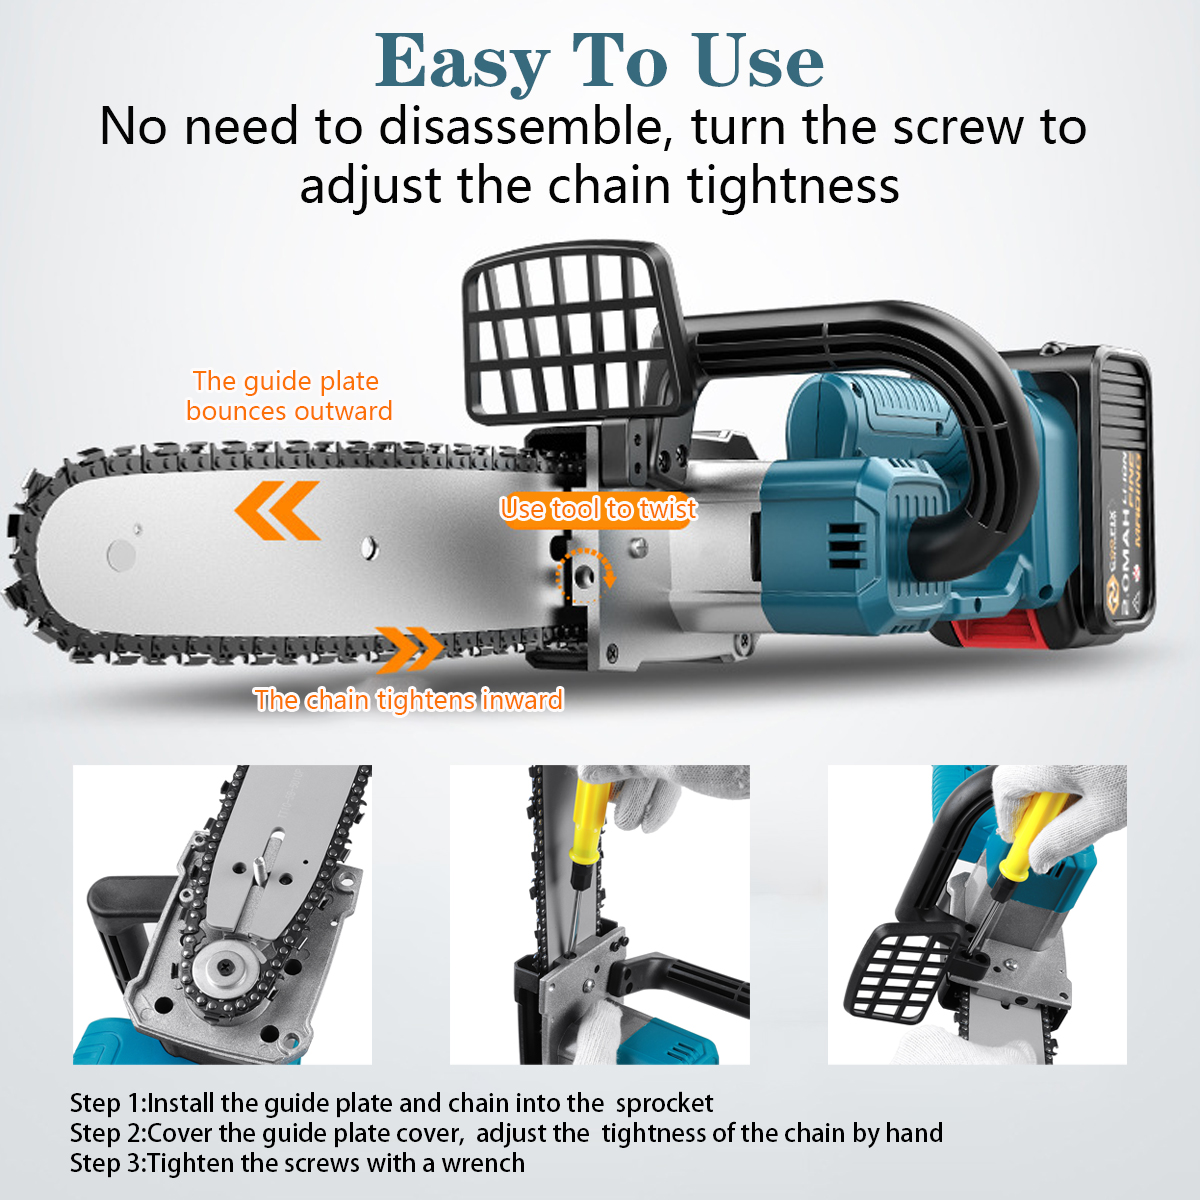 21V-10-Inch-Cordless-Electric-Chain-Saw-Wood-Mini-Cutter-One-Hand-Saw-Woodworking-Tool-1809052-5